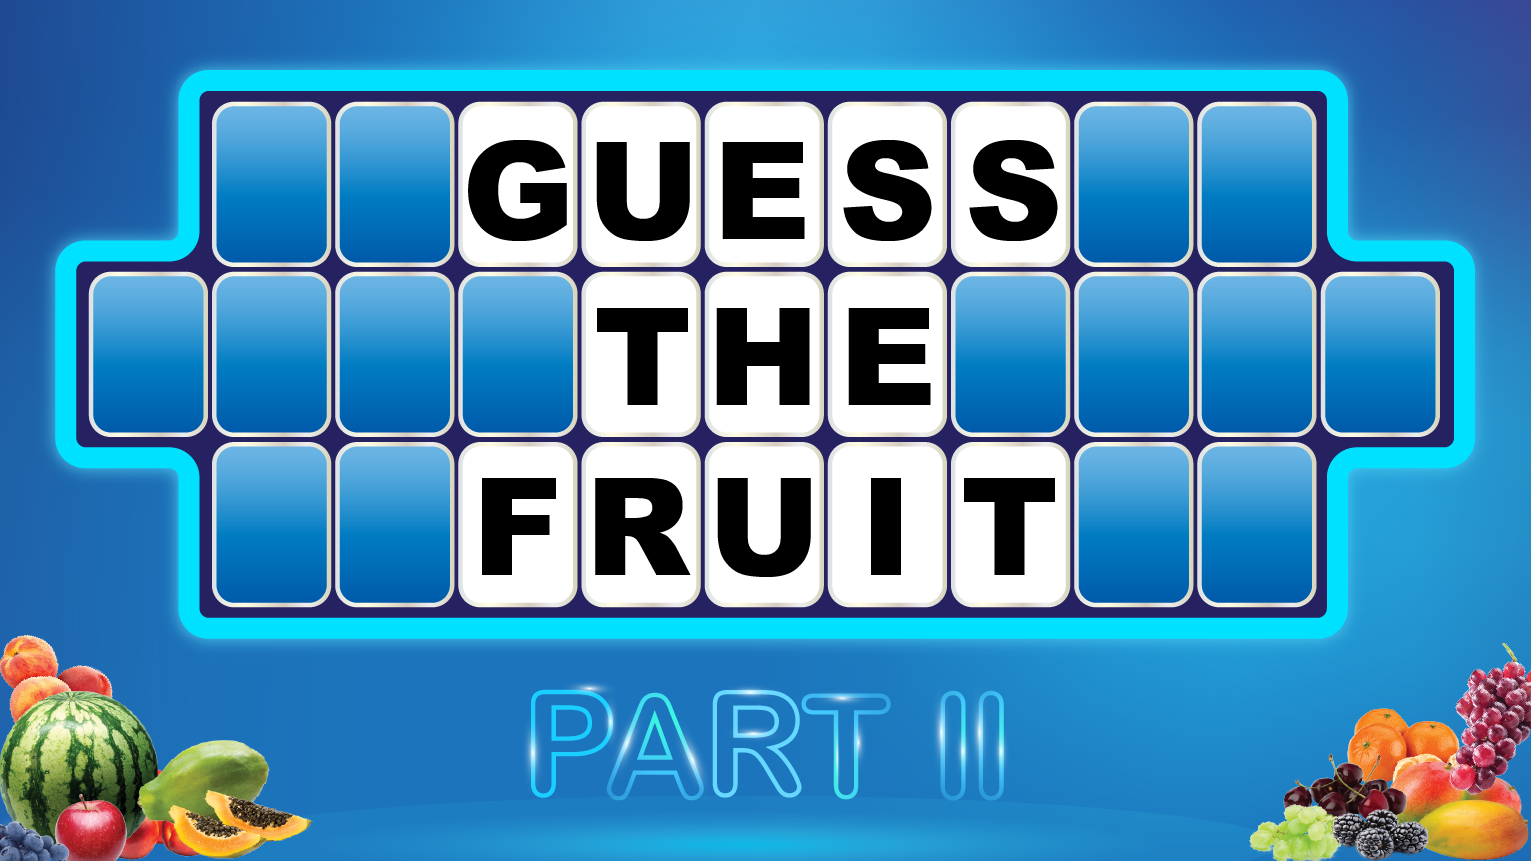 Word Guessing Game - Guess the Fruit - Part 2